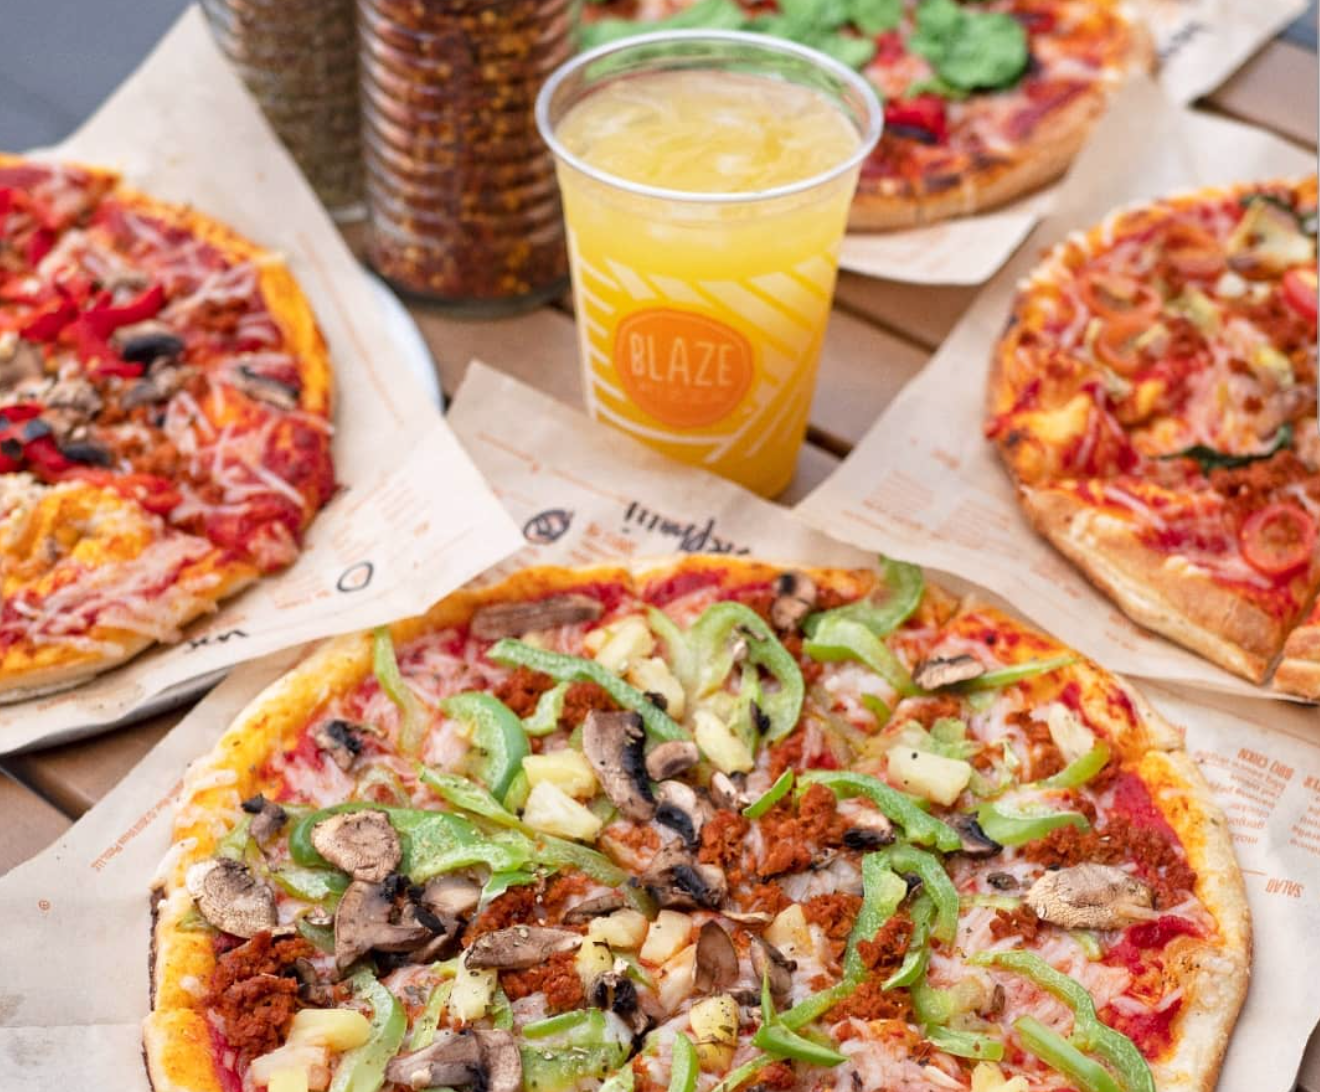 Delicious pizza you can enjoy with a Blaze Pizza fundraiser.